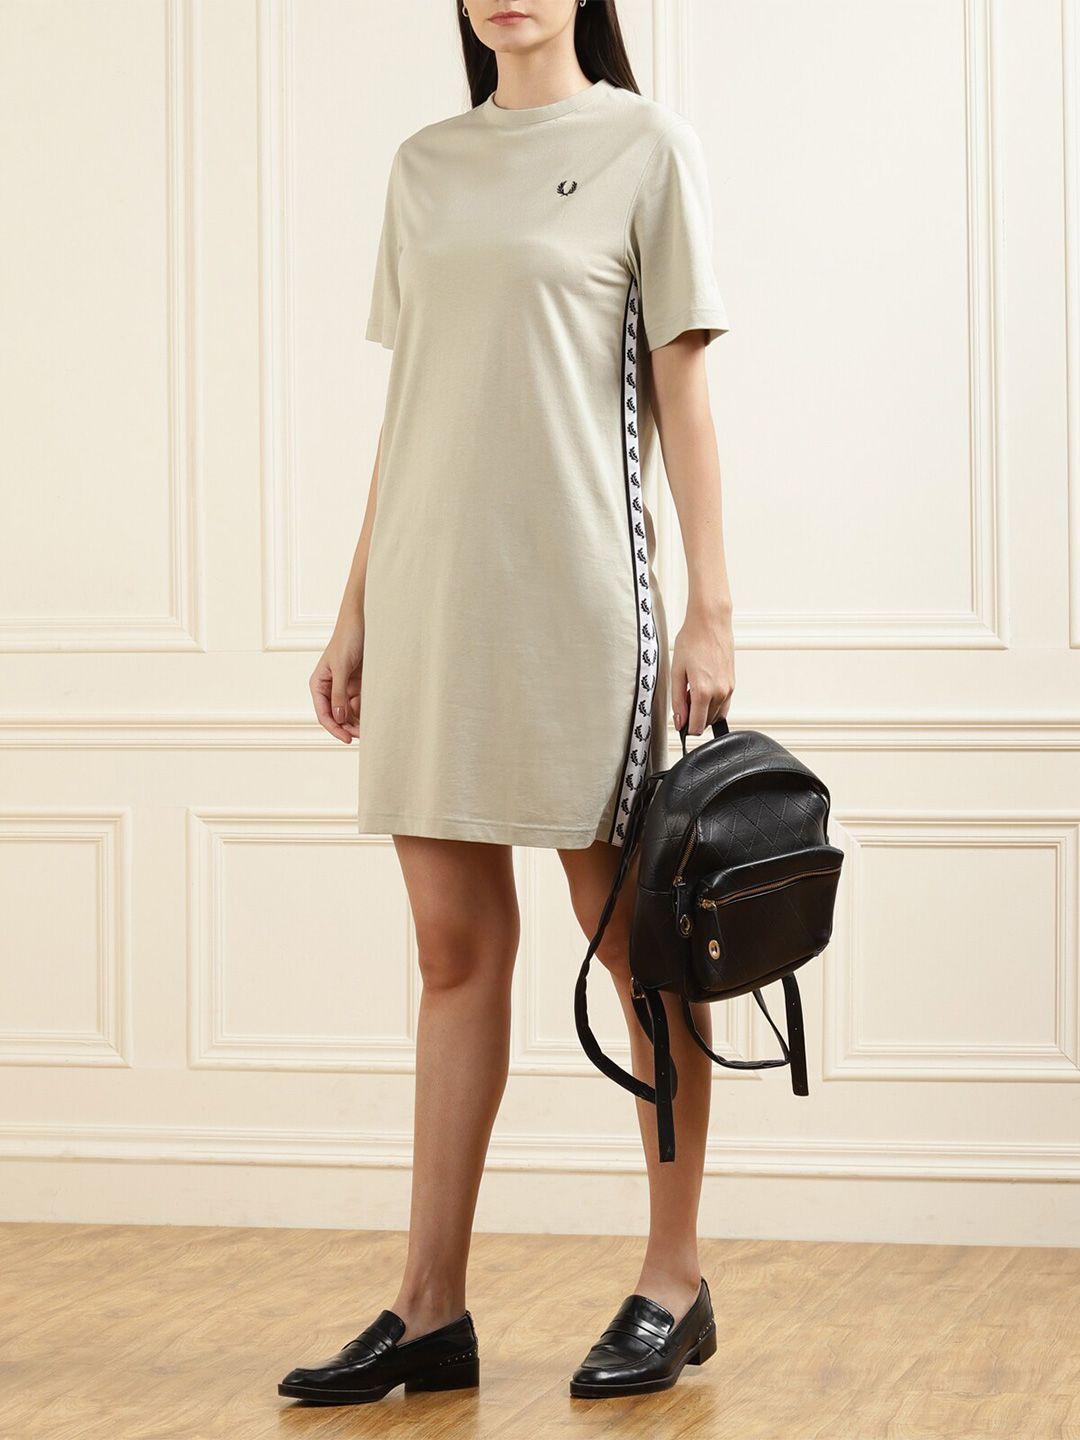 fred perry women cream-coloured t-shirt dress